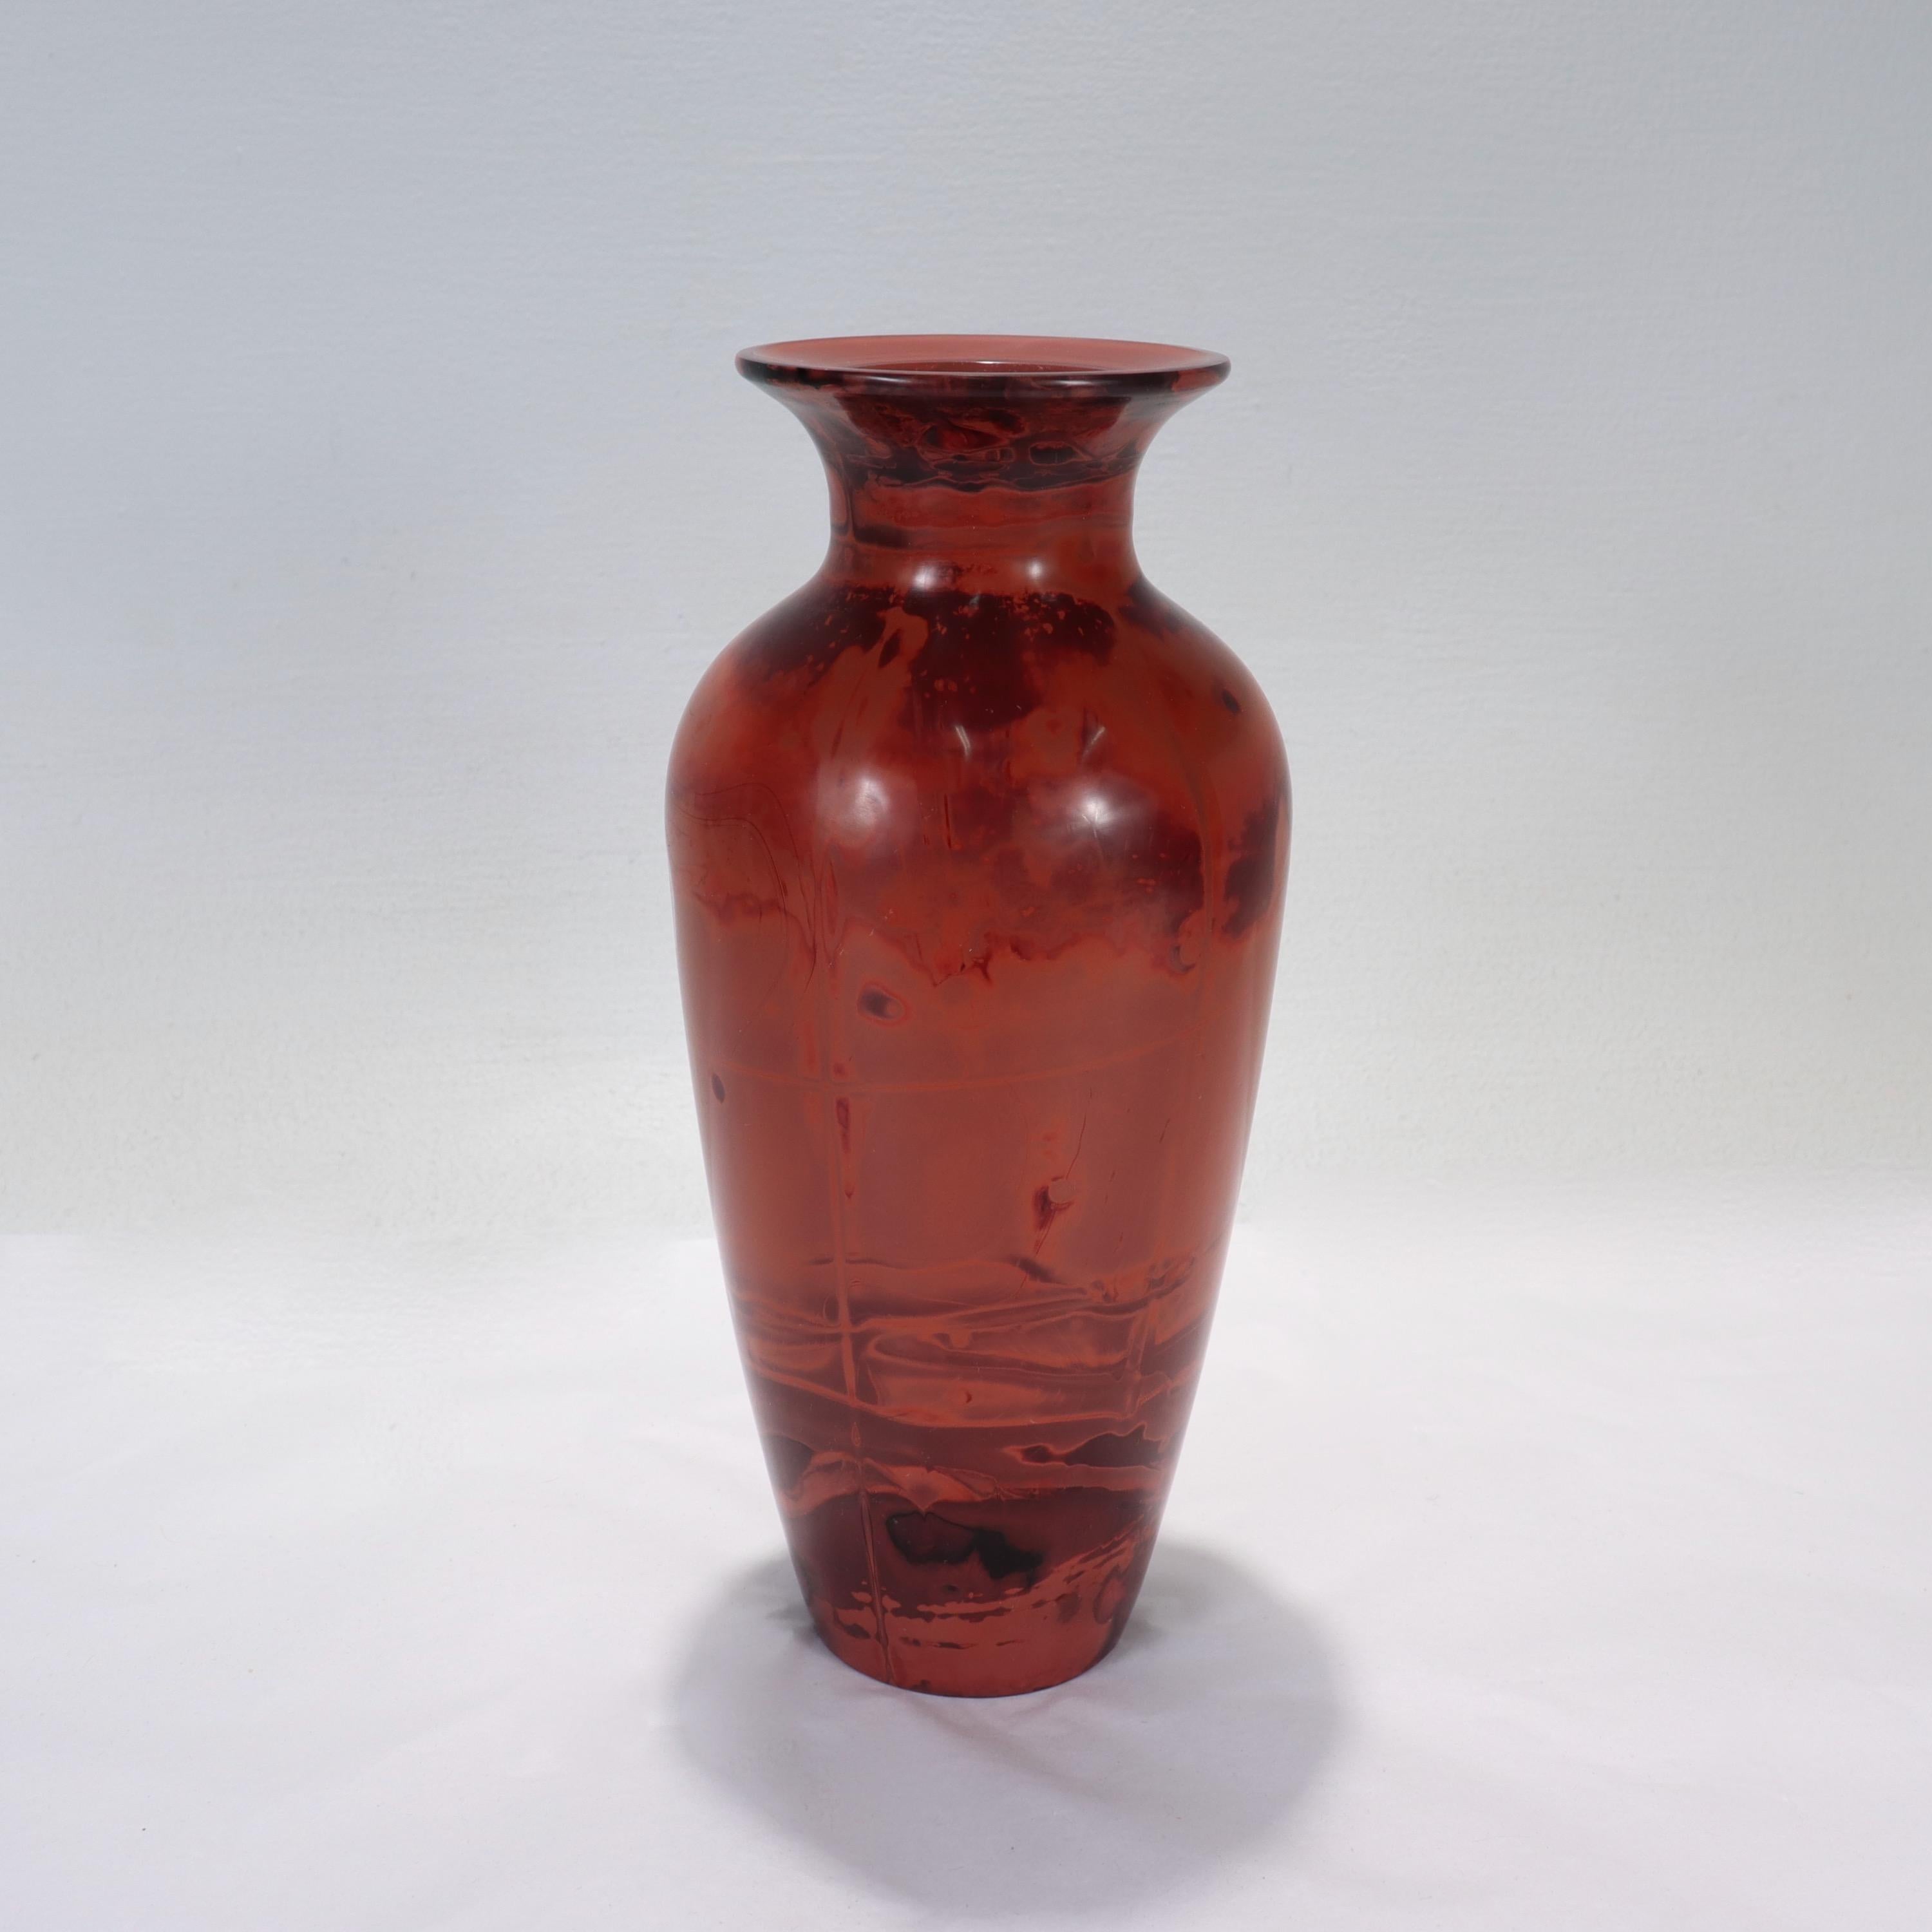 A fine Chinese Peking glass vase.

Crafted to imitate realgar (雄黃), a mineral widely used in Traditional Chinese Medicine.

With a polished pontil to the base.

Simply a beautiful vintage Chinese glass vase!

Date:
Mid-20th Century or